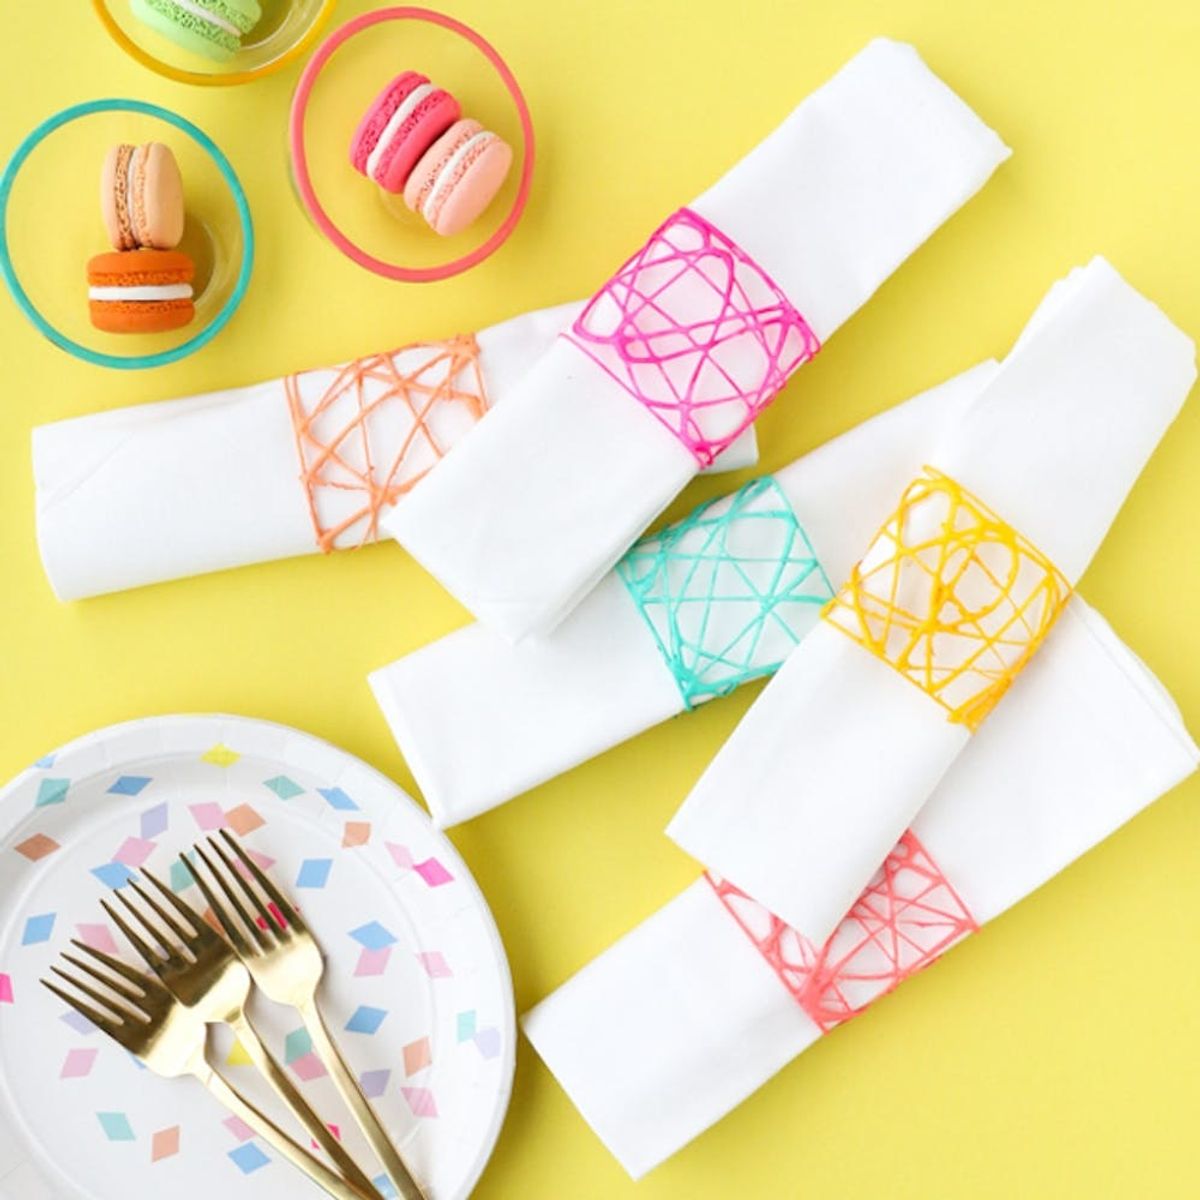 20 Bright and Colorful Holiday Hostess Gift Ideas You Can DIY